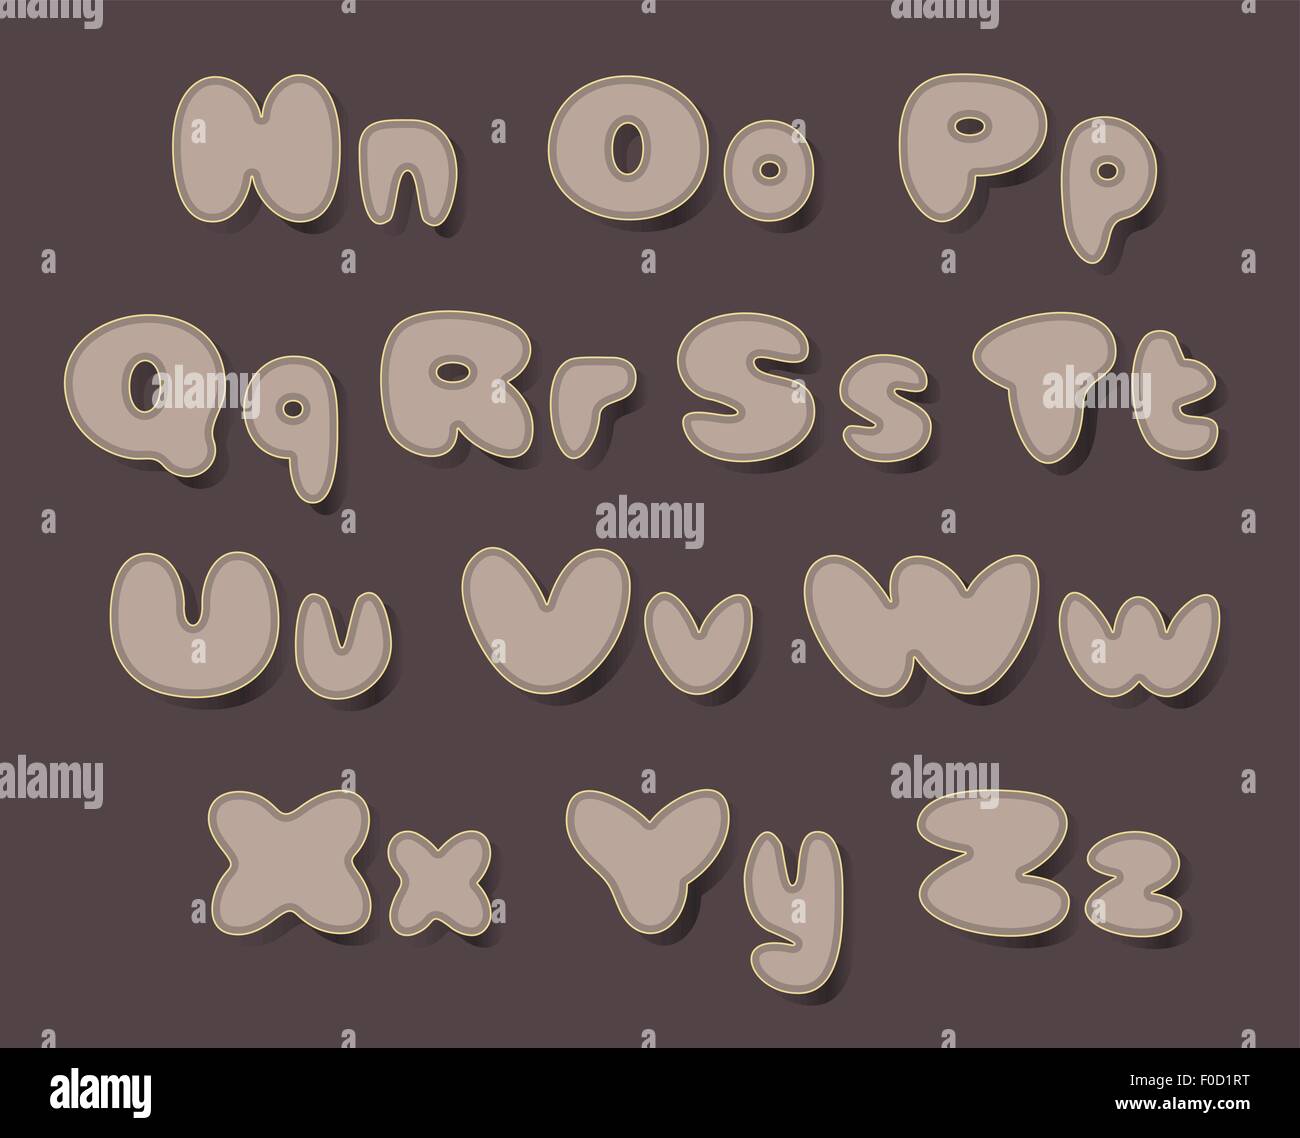 alphabet set with cocoa color Stock Vector